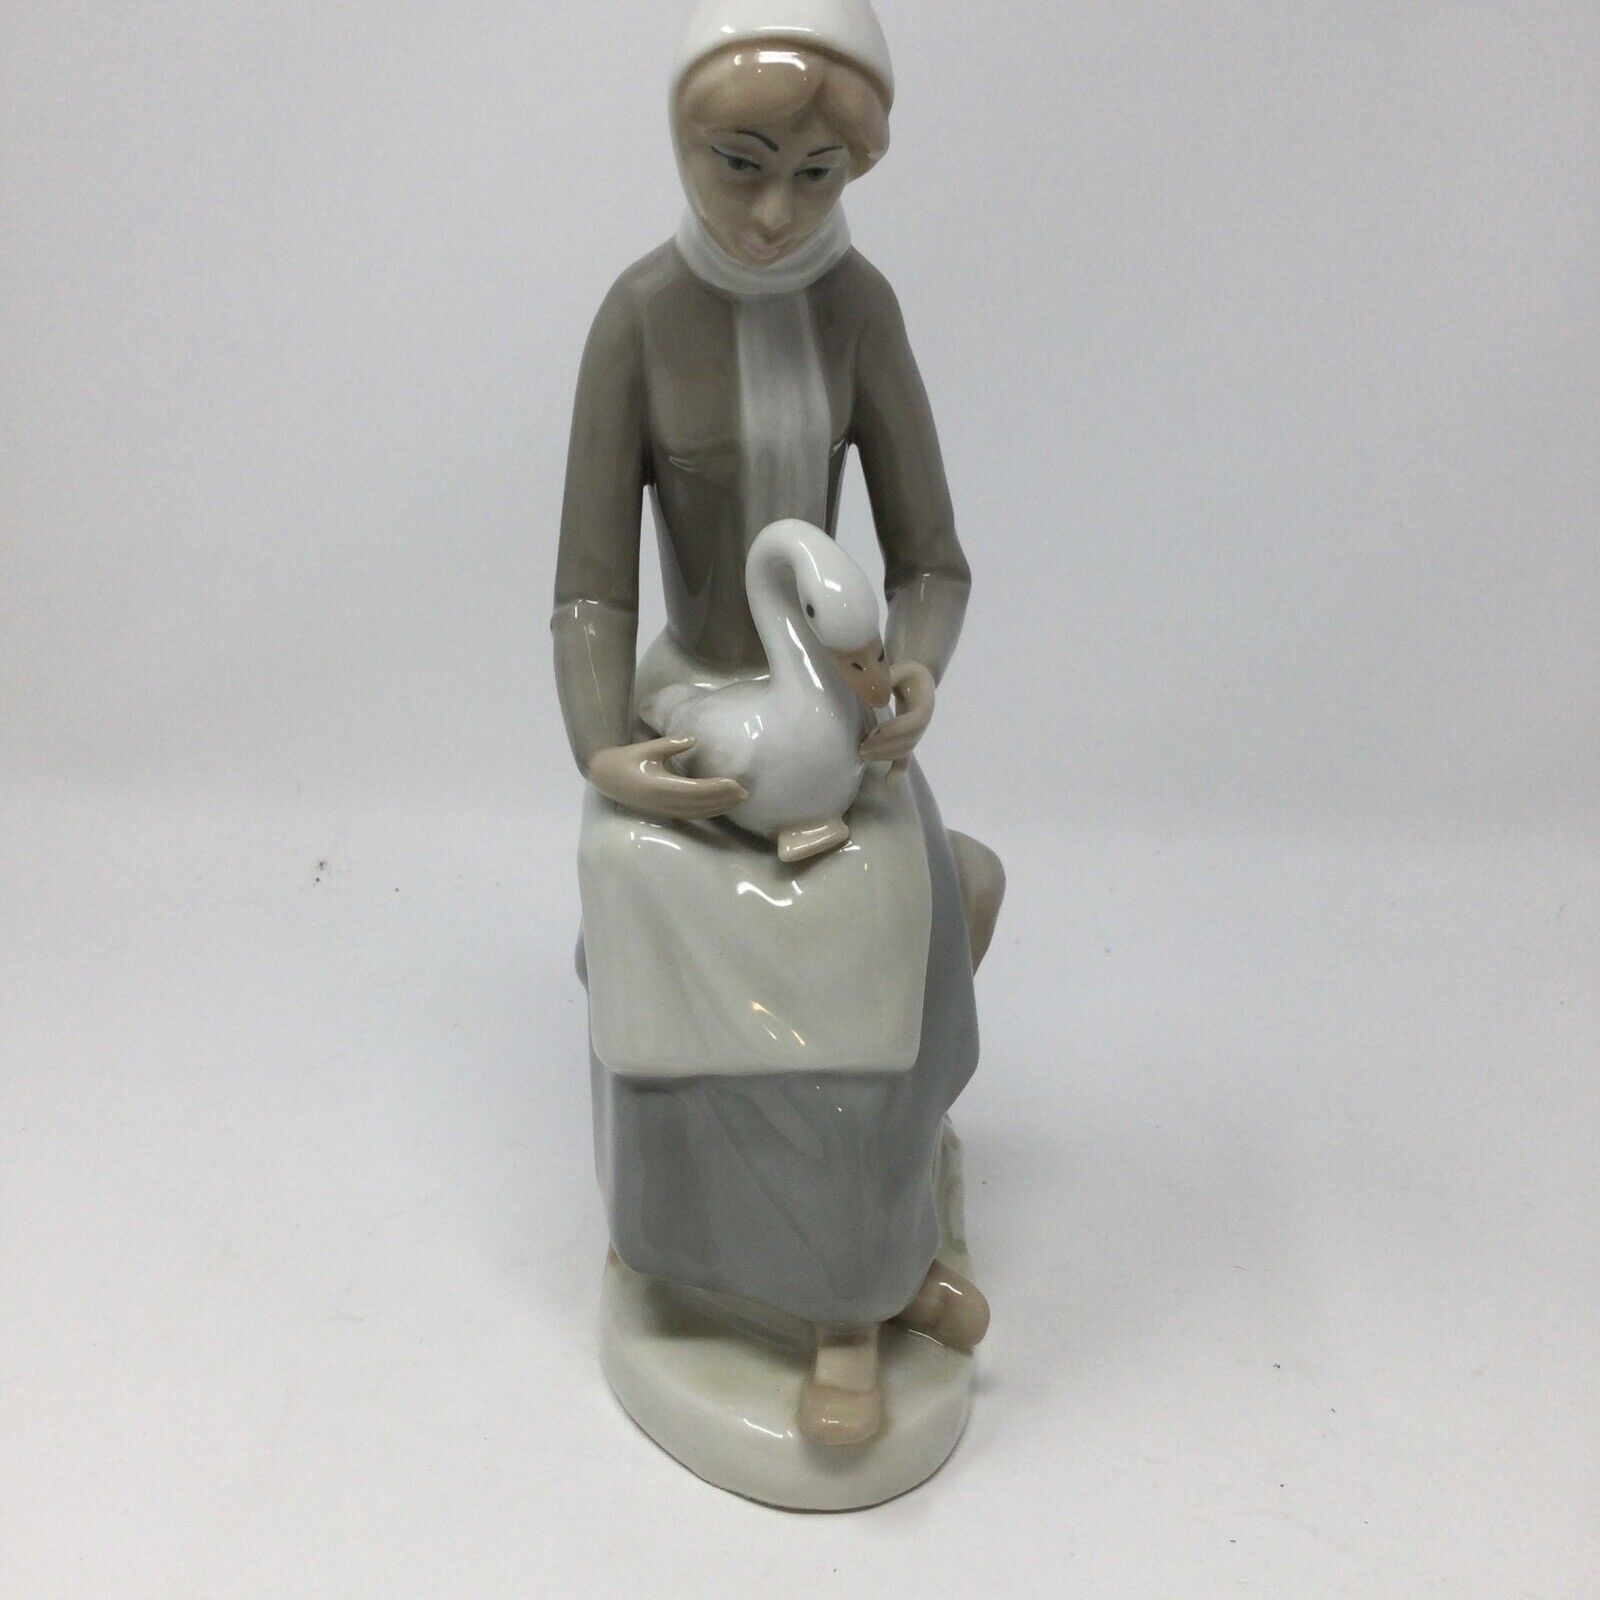 Casades Porcelain Figurine Lady With Goose. Approximately 9”. Spain